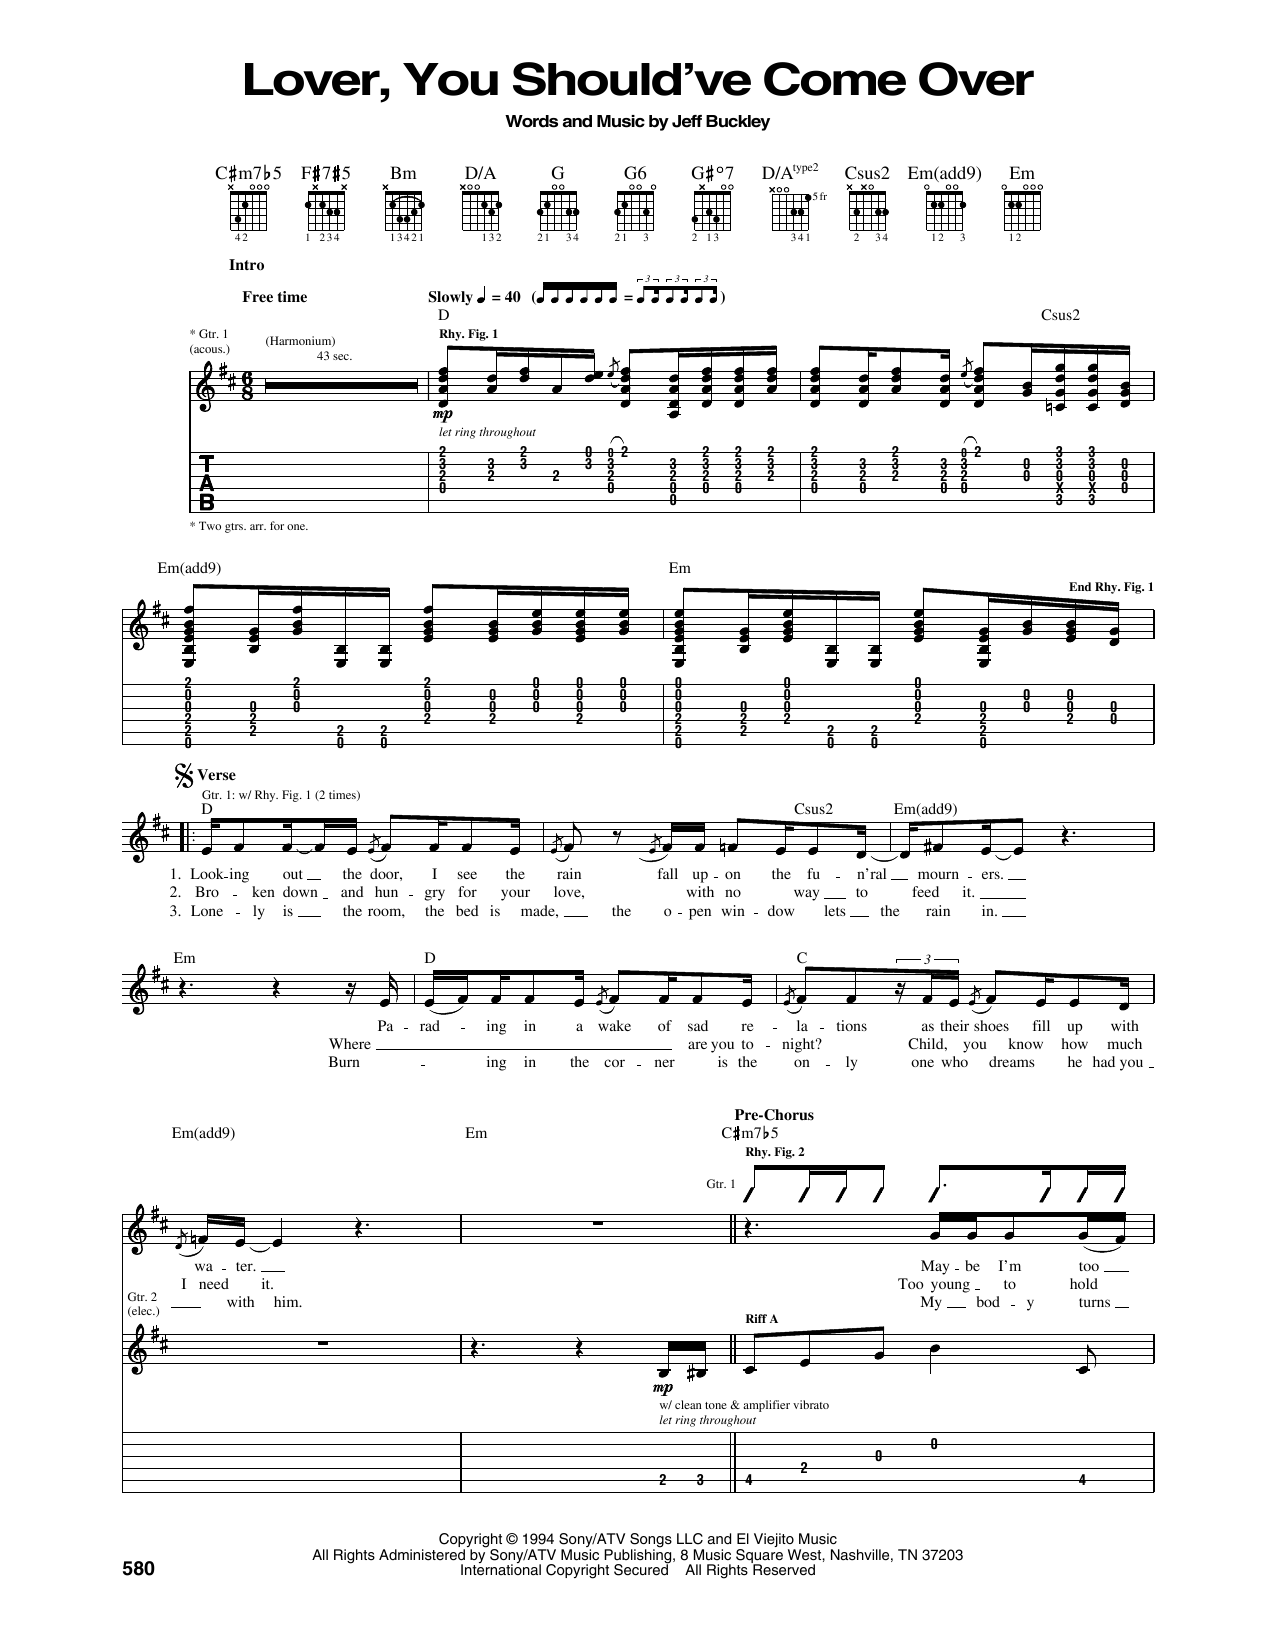 Download Jeff Buckley Lover, You Should've Come Over Sheet Music